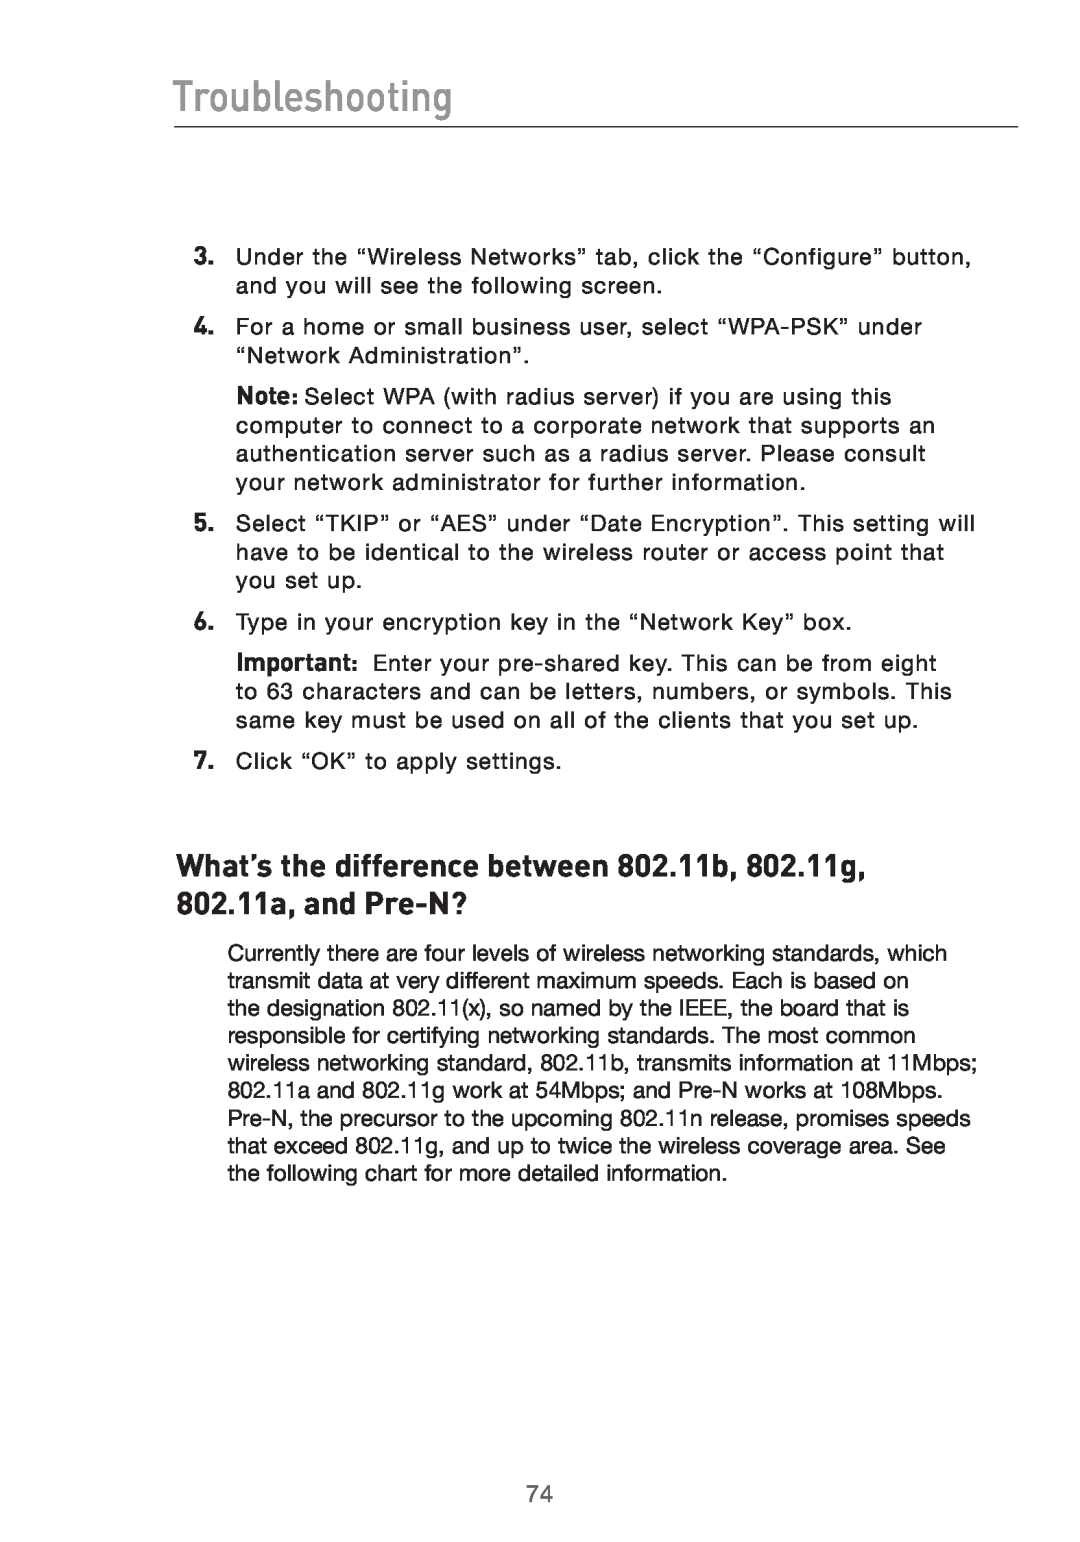 Belkin manual What’s the difference between 802.11b, 802.11g, 802.11a, and Pre-N?, Troubleshooting 